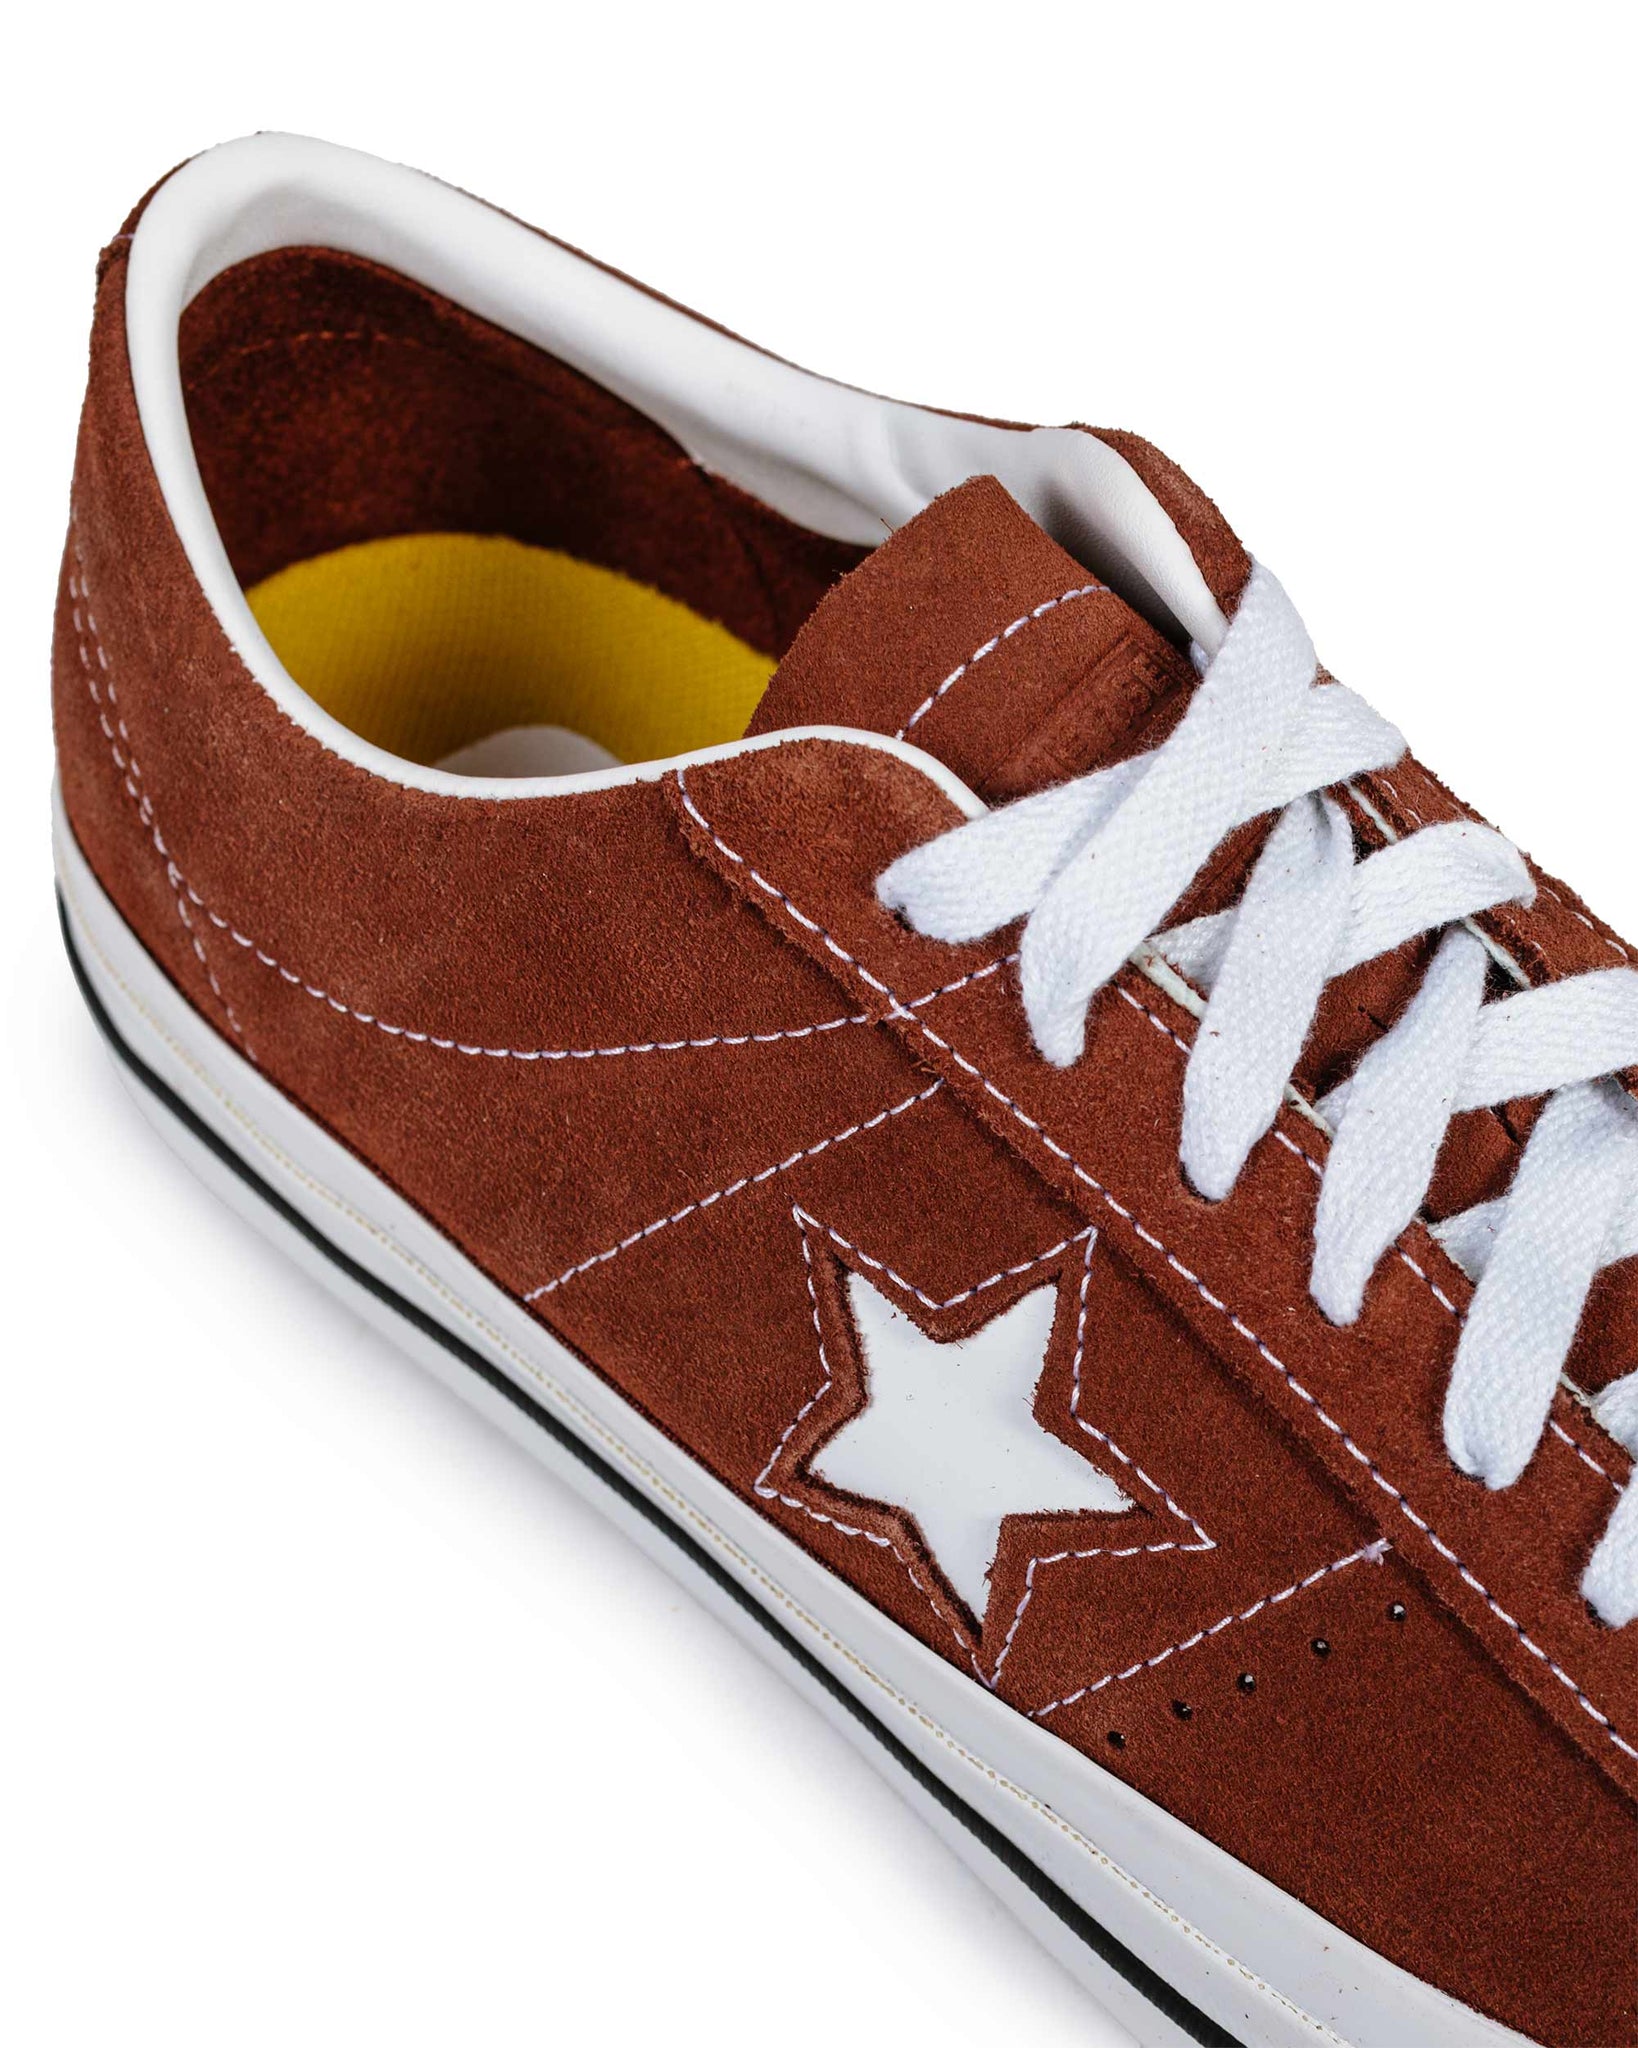 Only 45.00 usd for One Star Pro OX Vintage Suede Shoes Great deals!